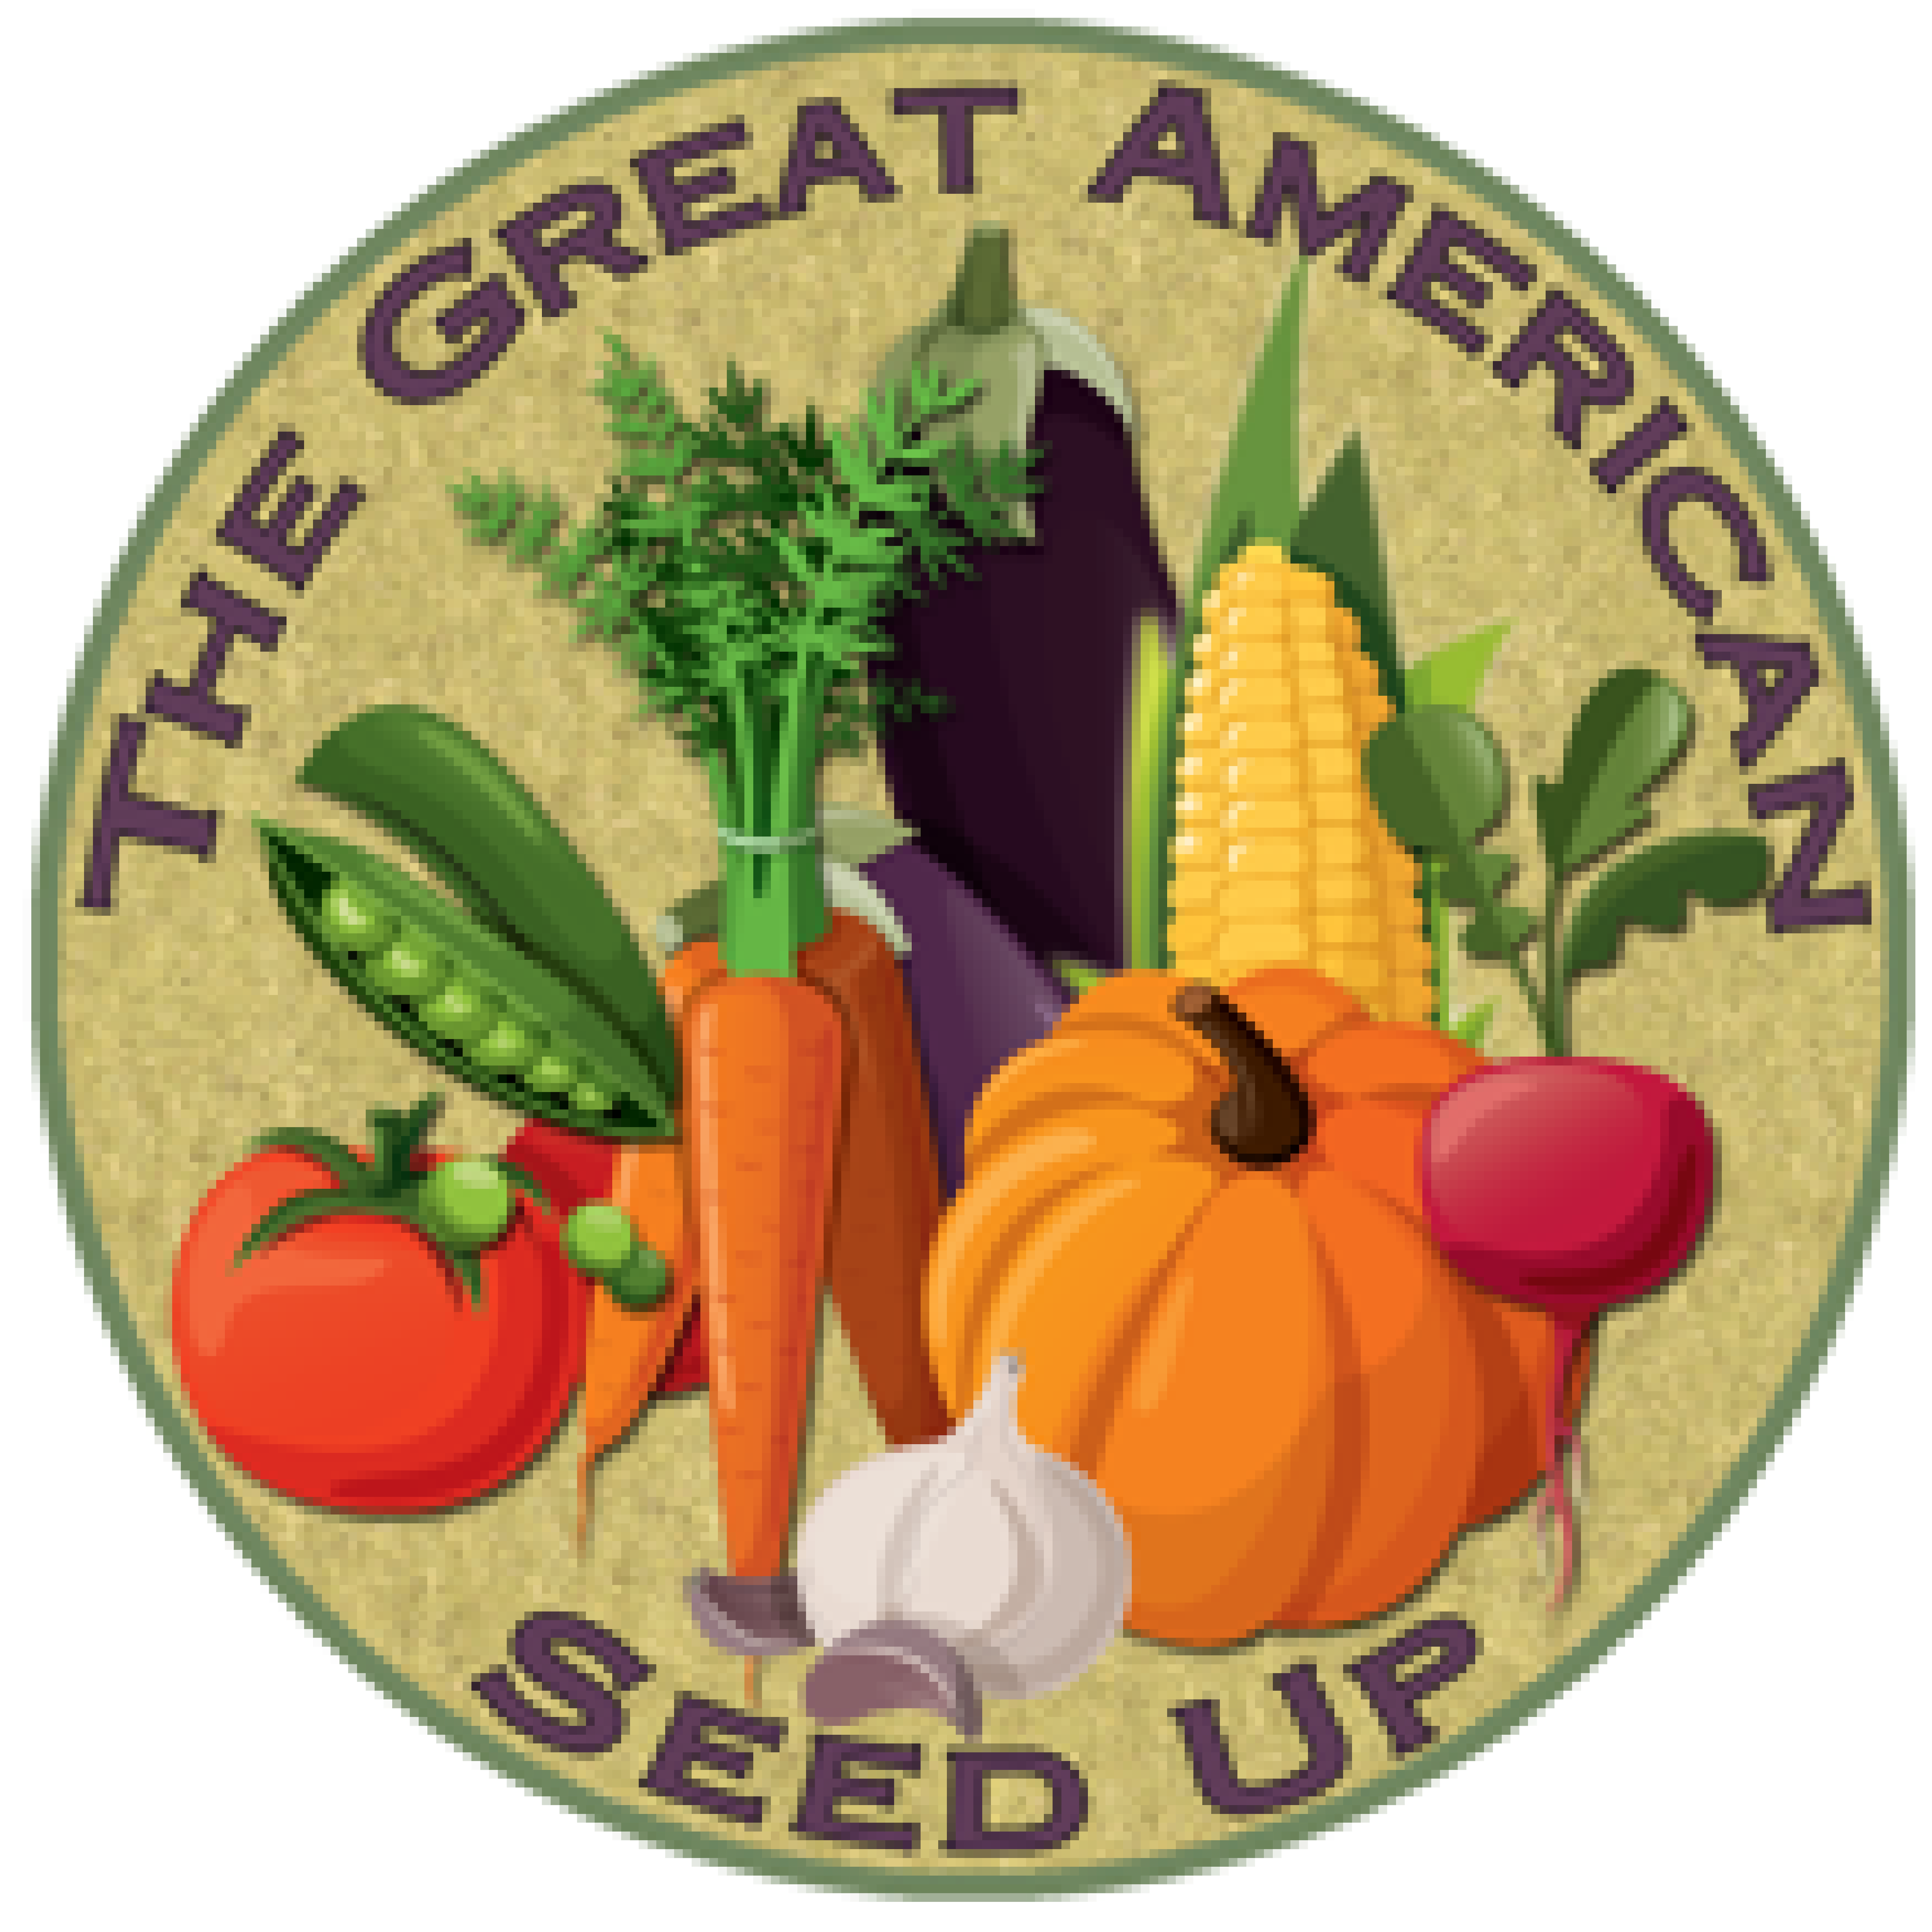 The Great American Seed Up provides quality, adaptable, open-pollinated garden seeds in bulk quantities for growers to save, grow and share.